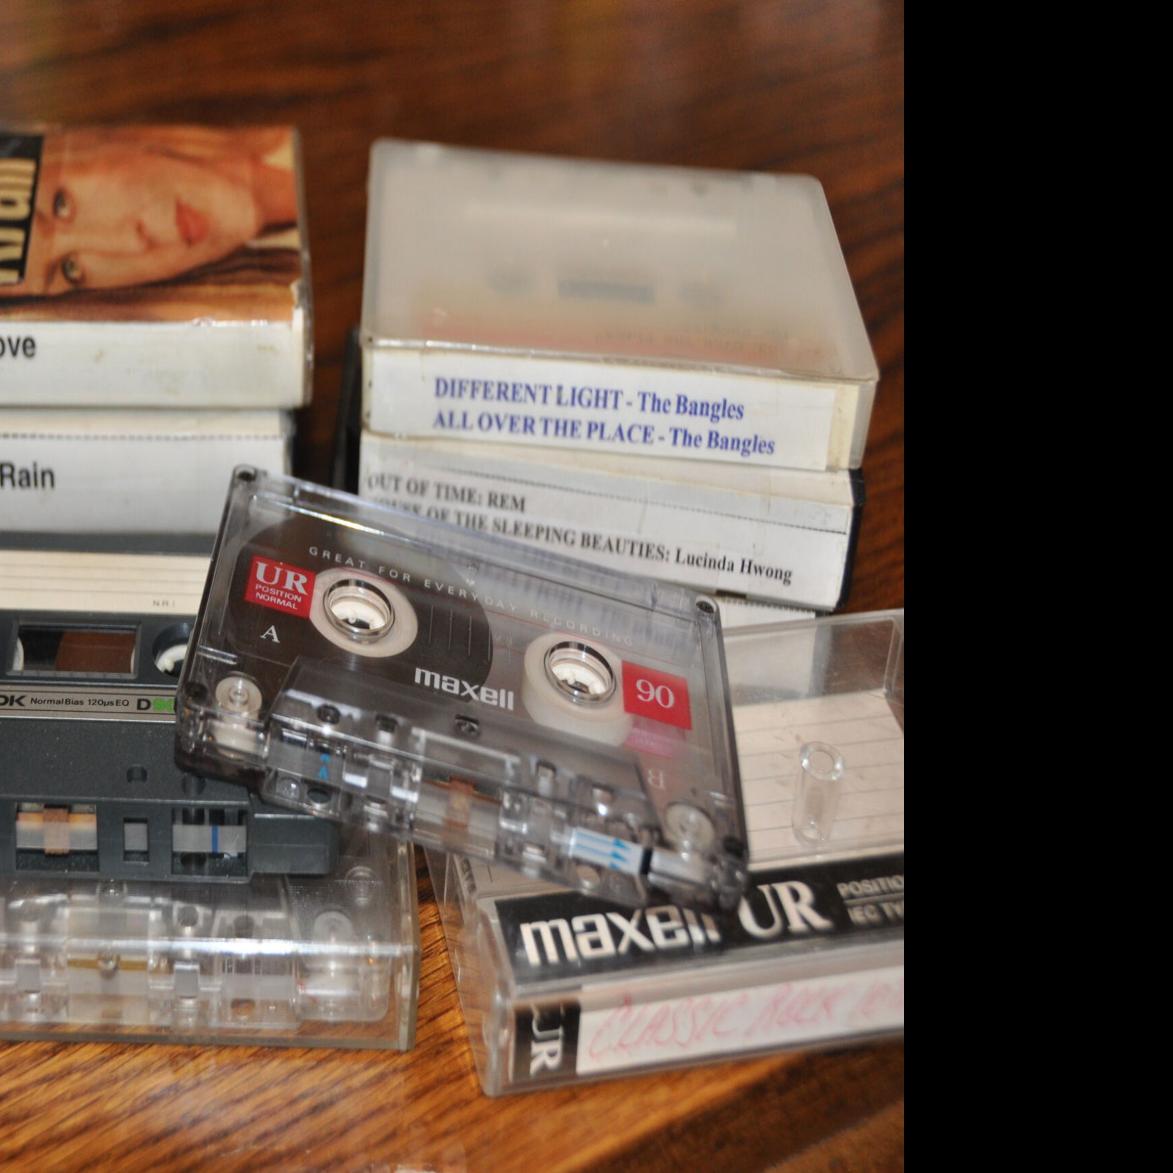 Cassette tapes making a comeback